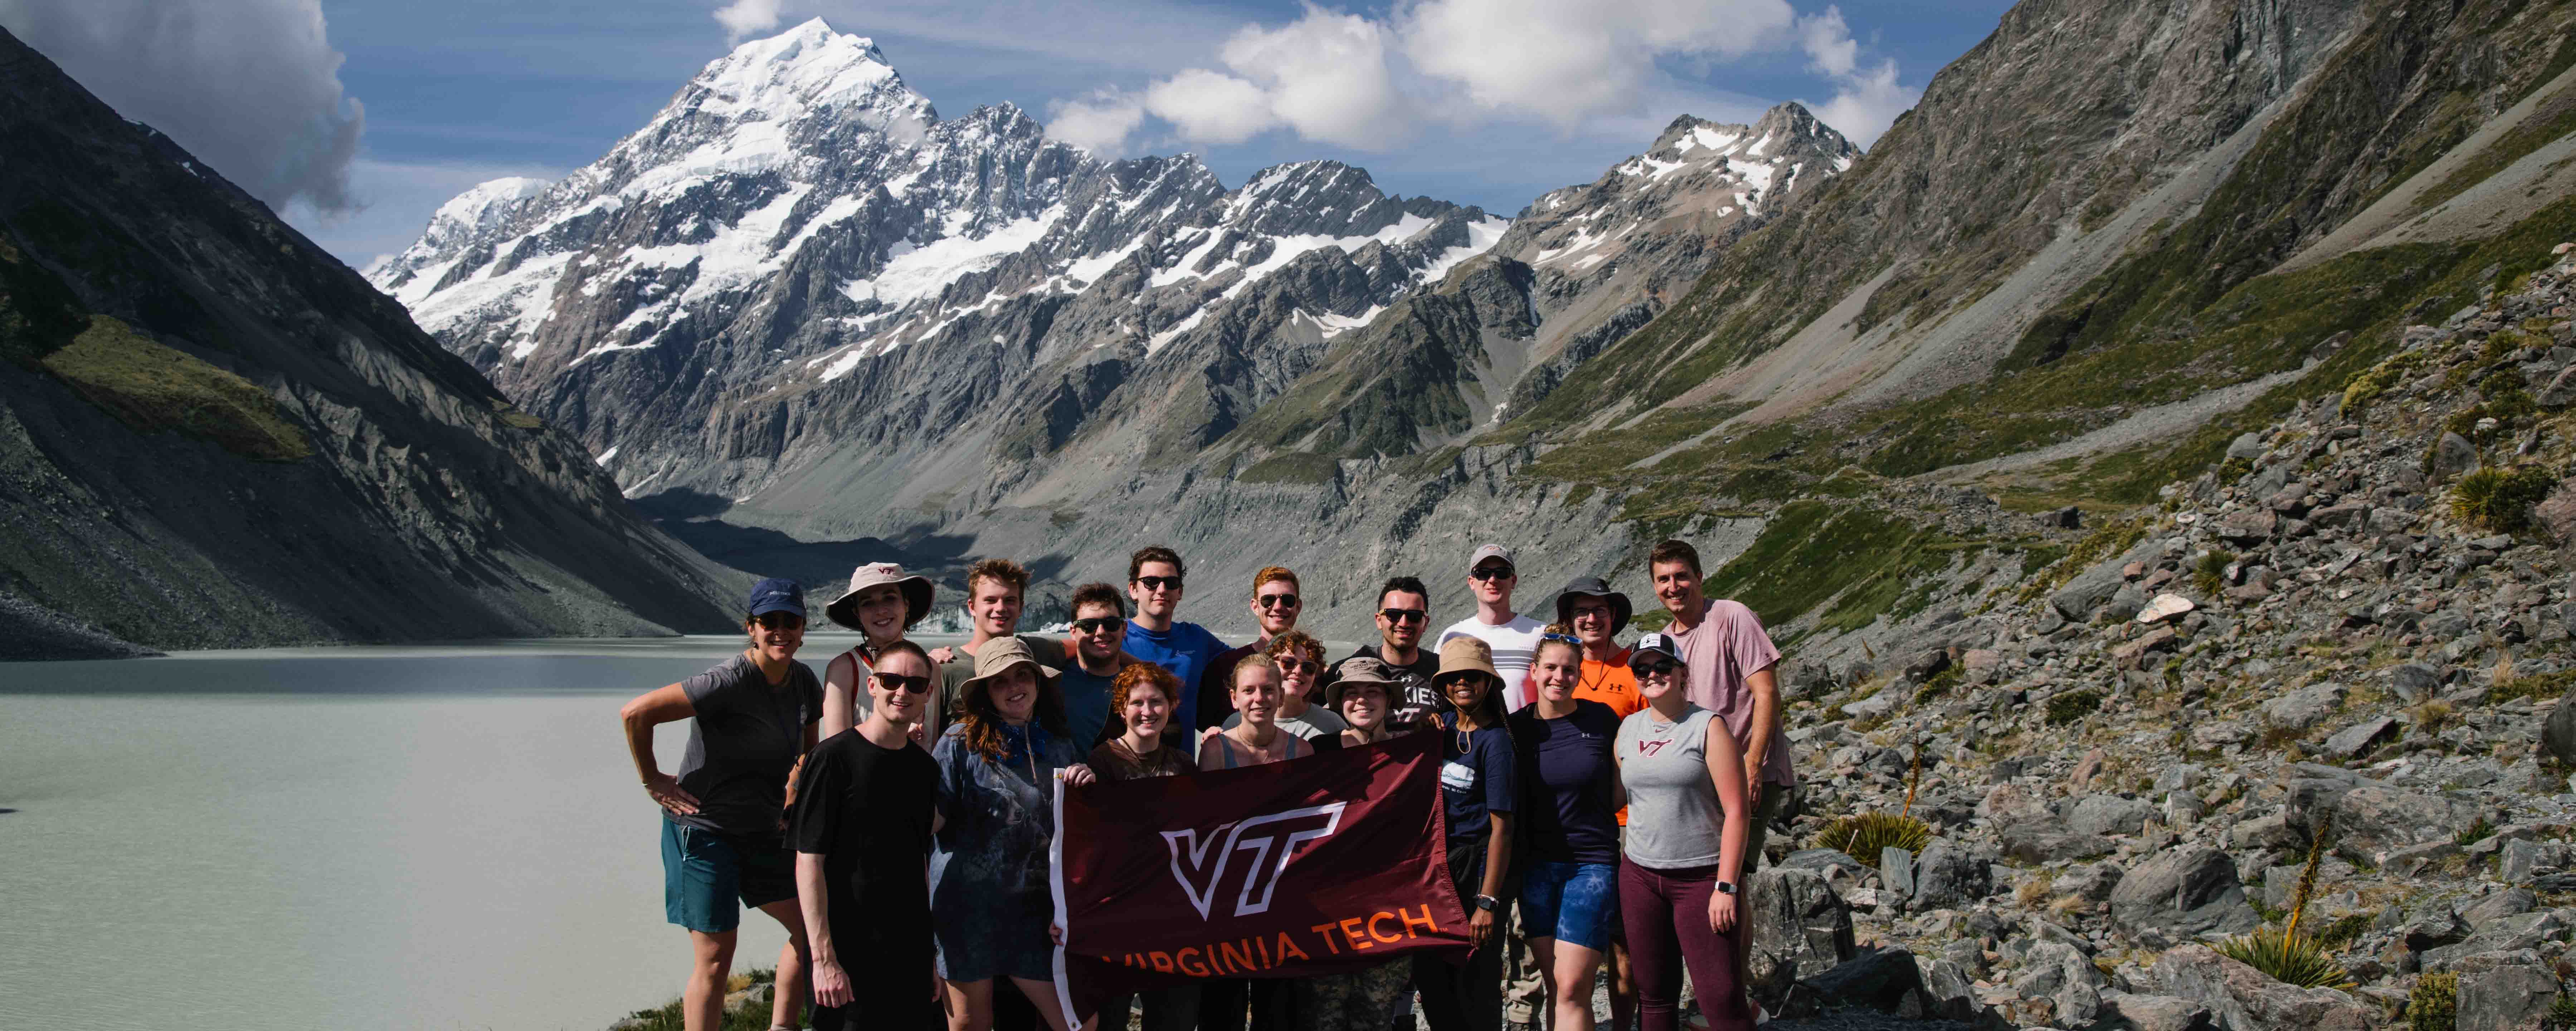 Students holding a Virginia Tech flag in front of a milky glacier lake and snow covered, skyscraping mountain peak.